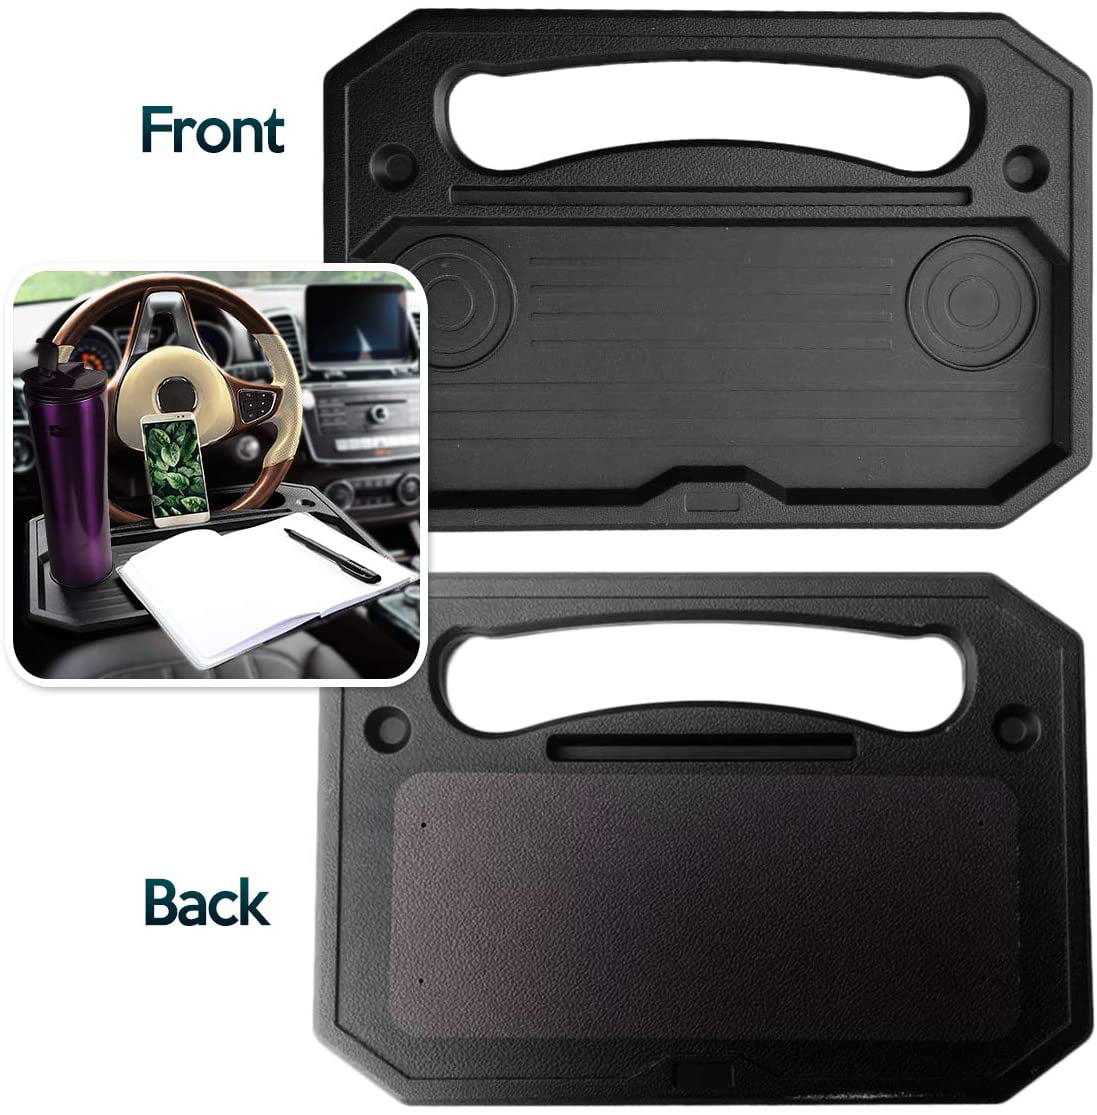 Portable Travel Notebook Laptop Eating Desk Multi Tray Fits Most Vehicles Steering Wheels 420 280 21mm SurfMall Steering Wheel Desk Tray 